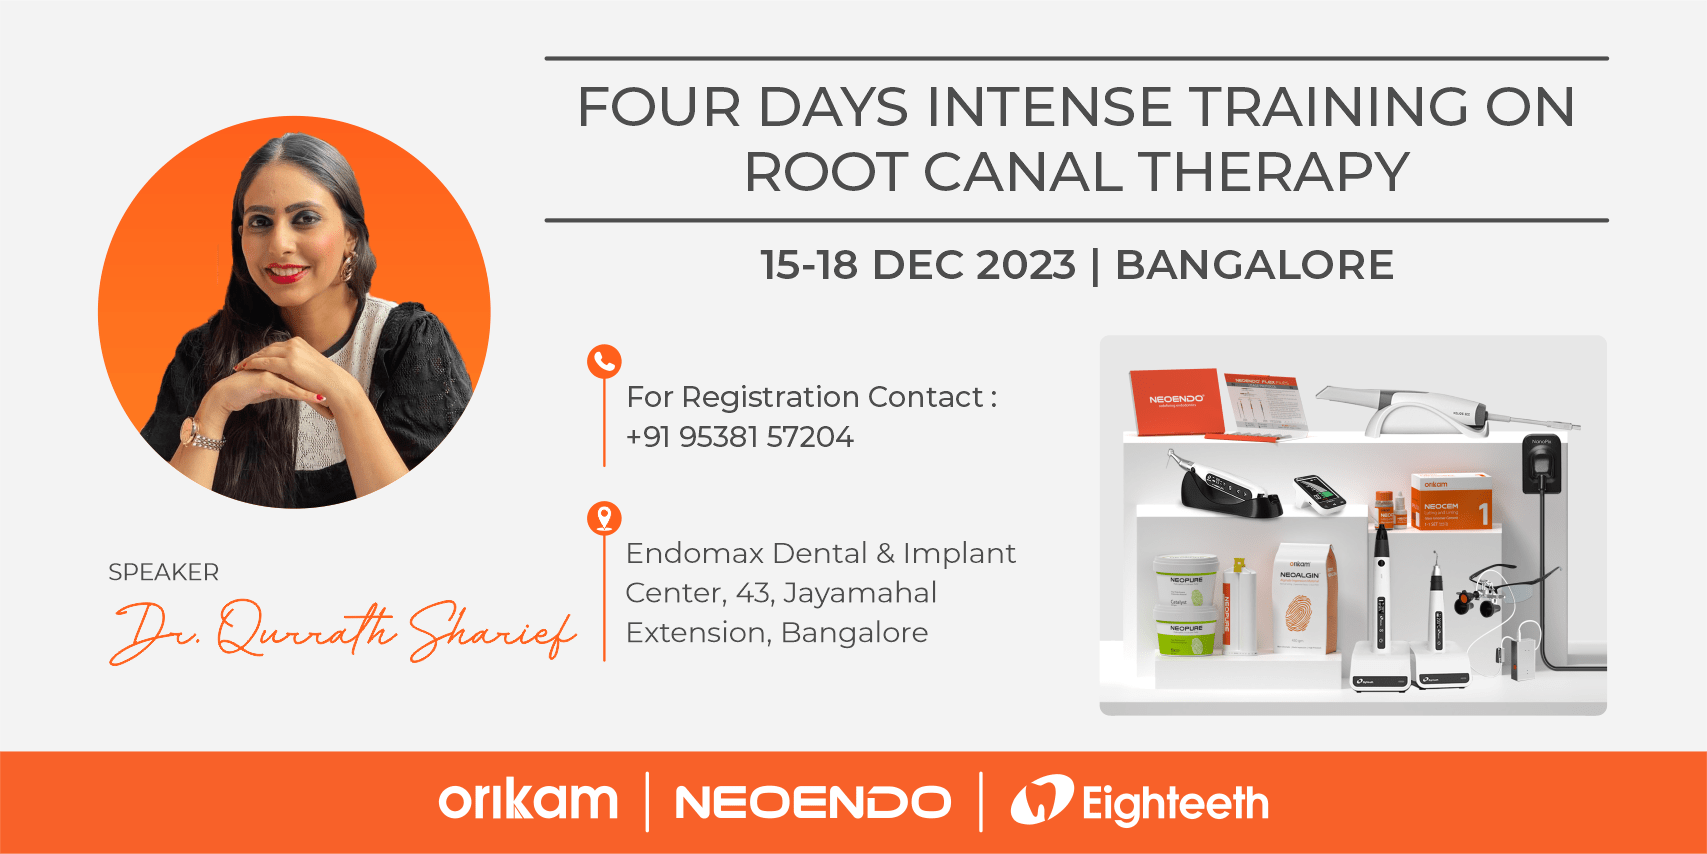 "Four Days Intense Training on Root Canal Therapy"